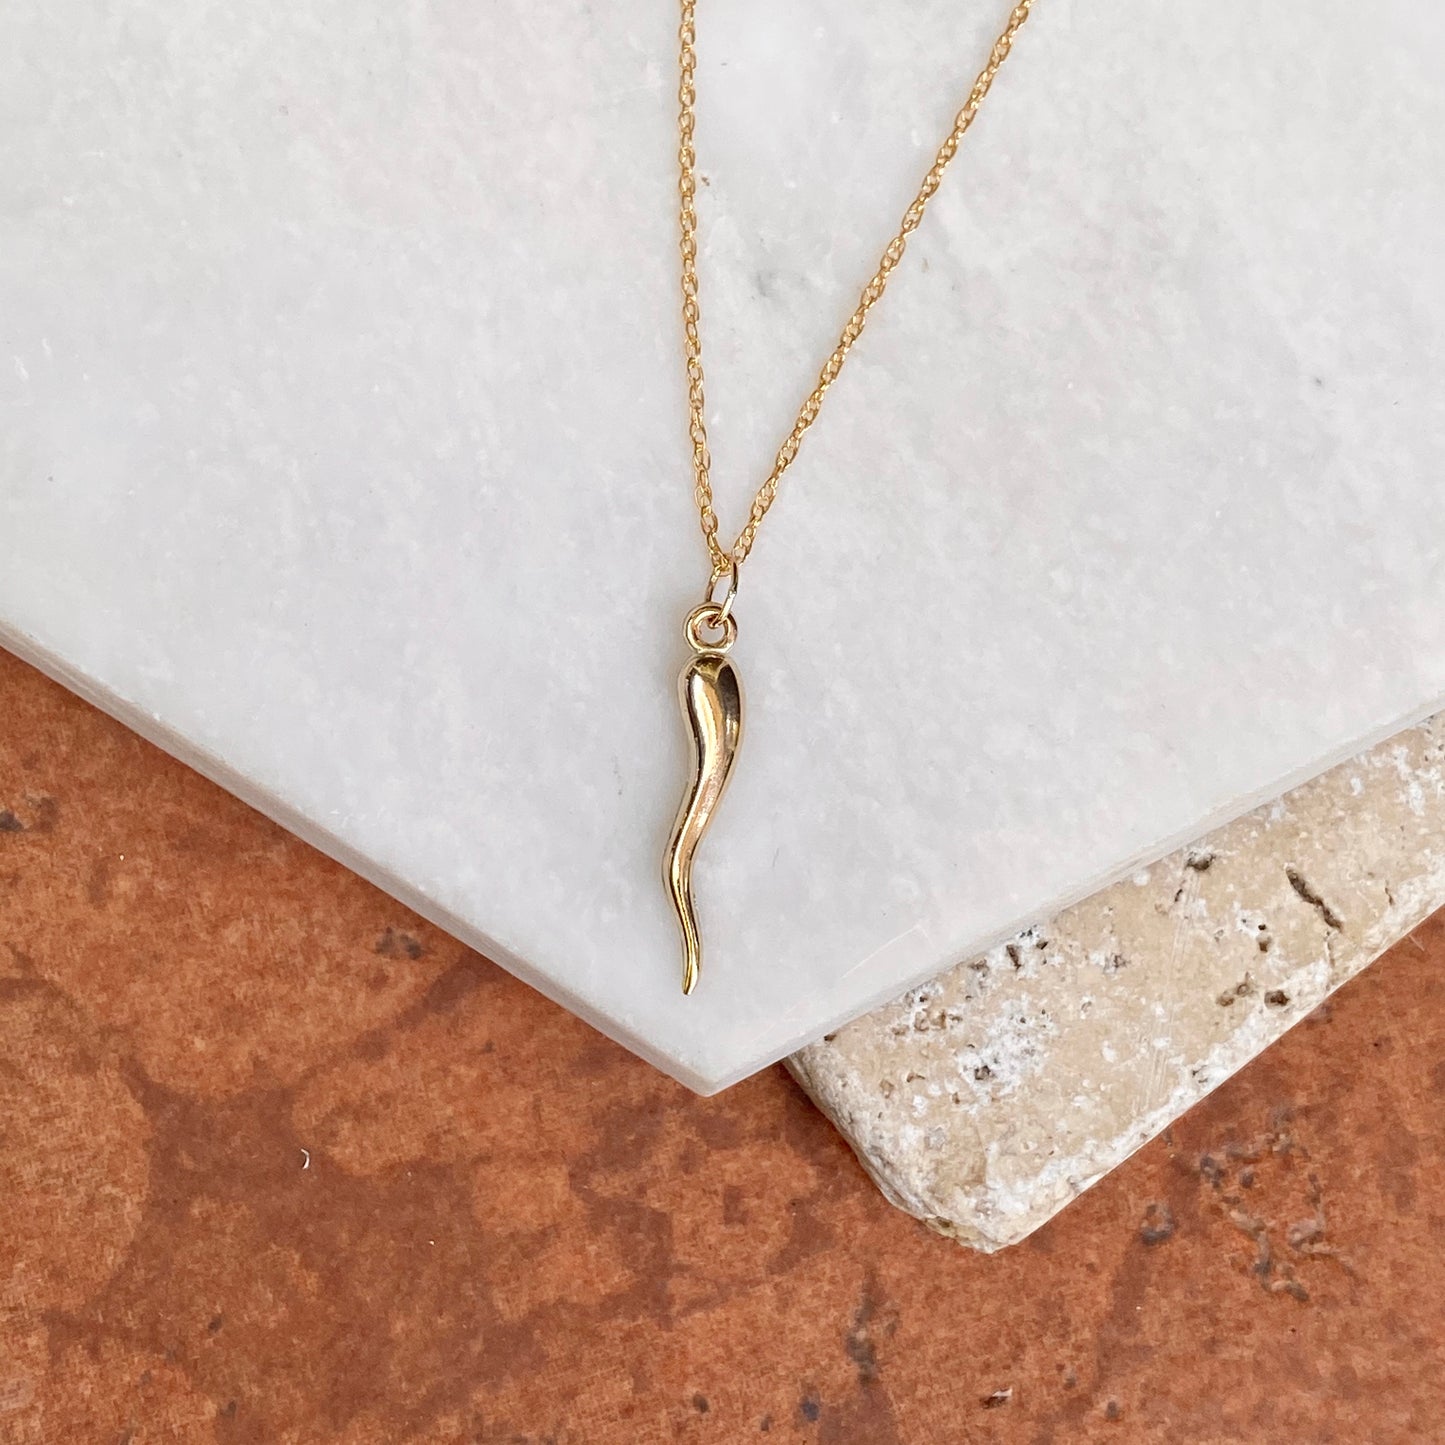 14KT Yellow Gold-Filled Italian Horn "Corno" Pendant Chain Necklace